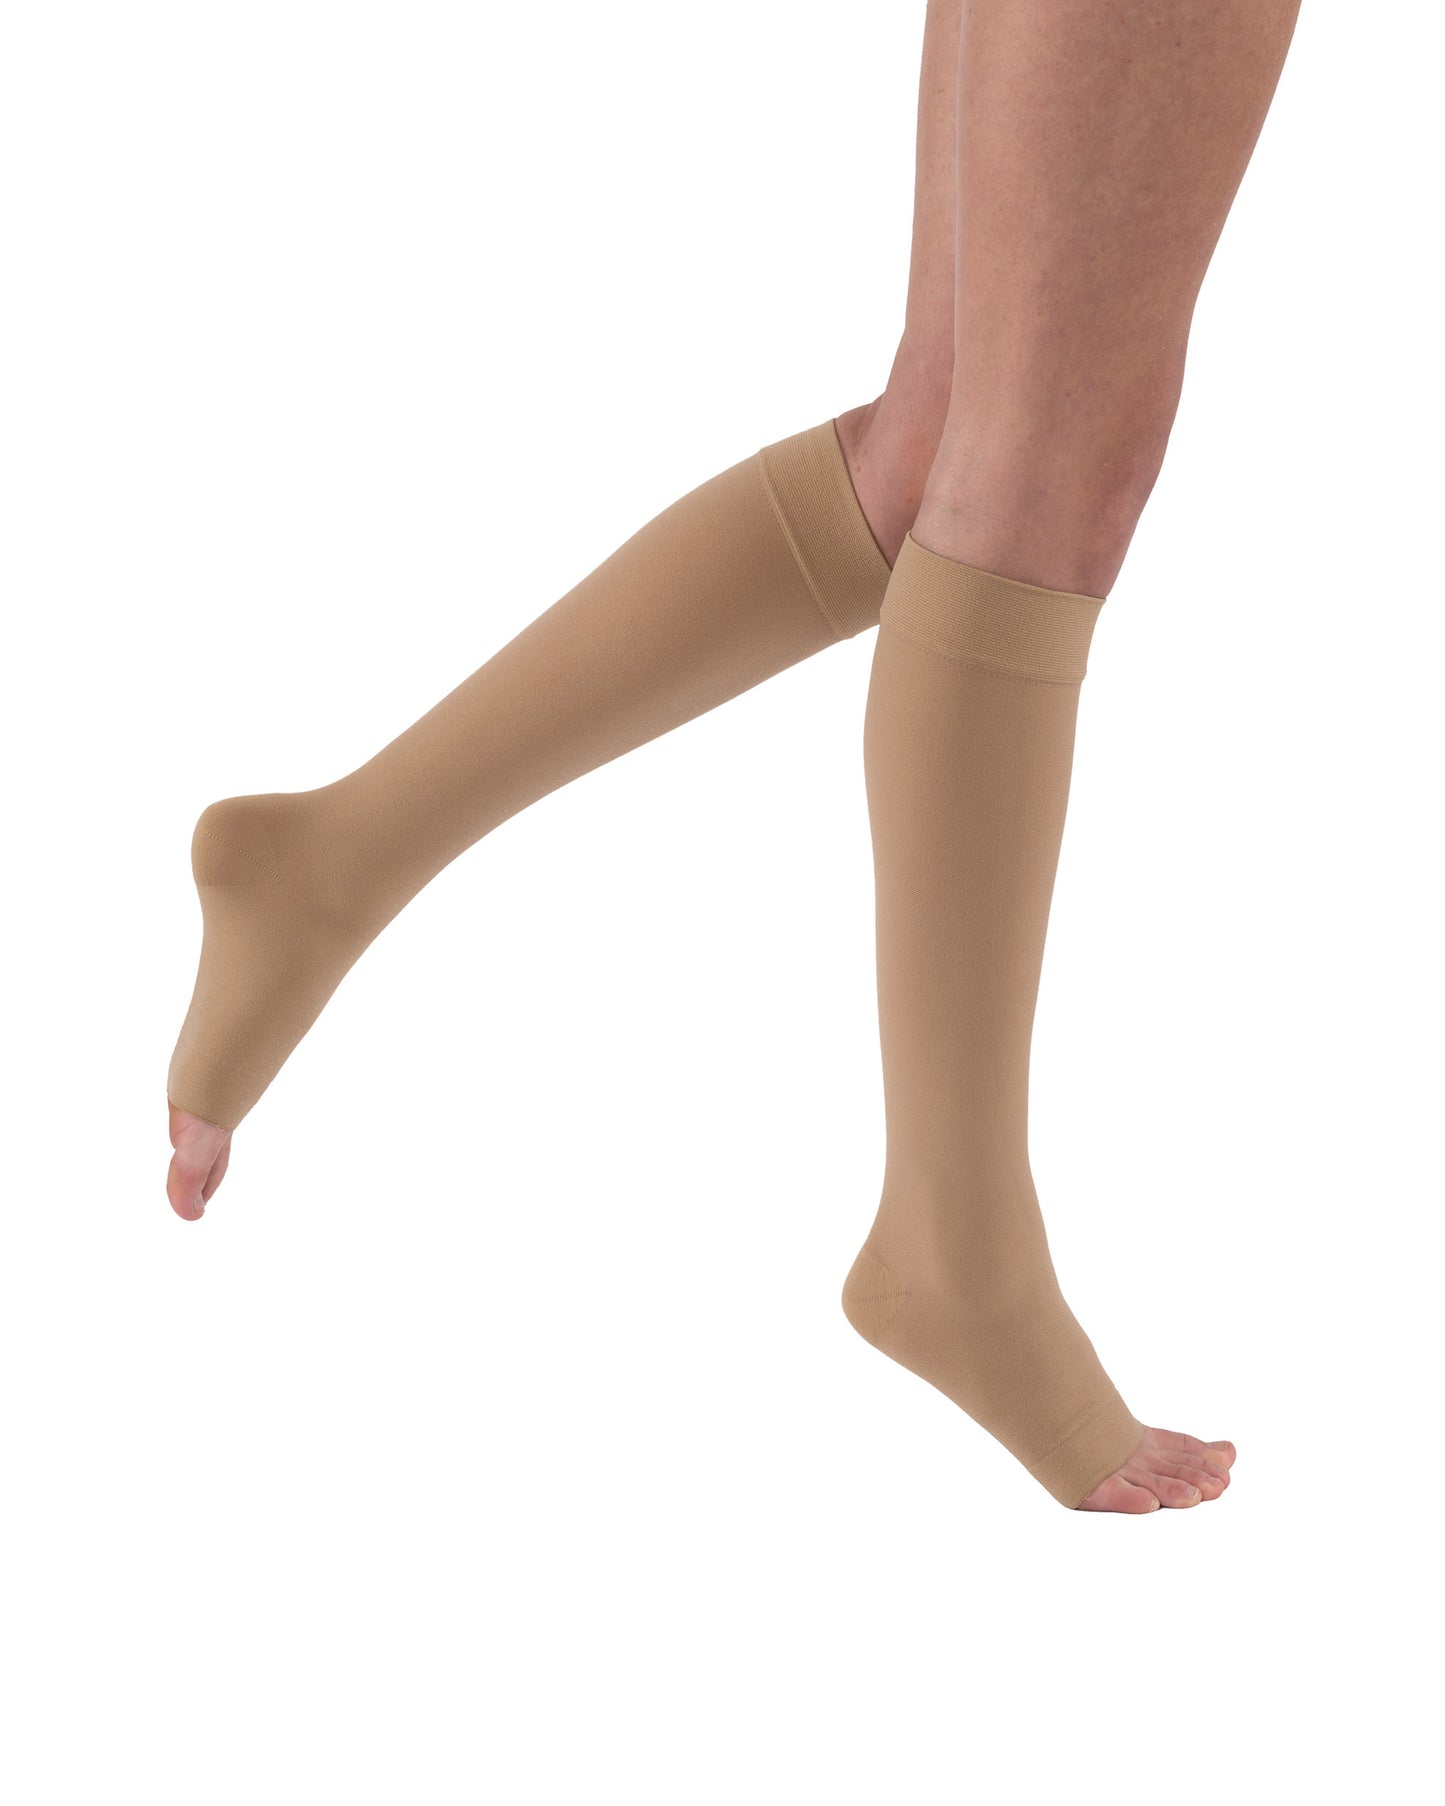 JOBST Relief Compression Stockings 20-30 mmHg Knee High Open Toe